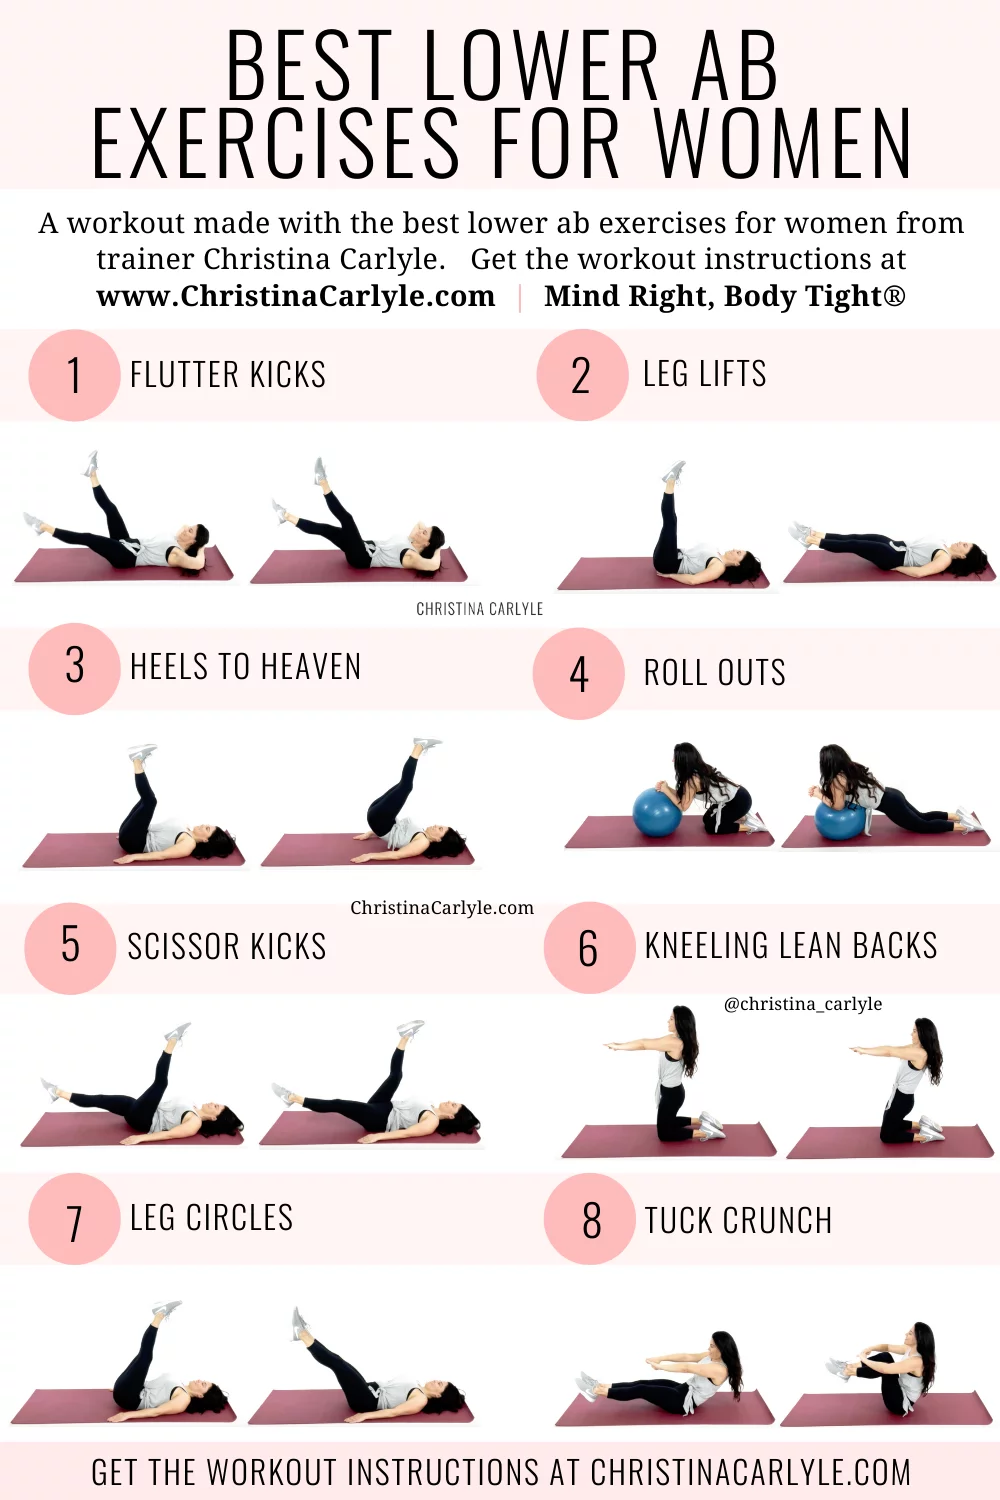 8 lower ab exercises being done by trainer Christina Carlyle in a lower ab workout